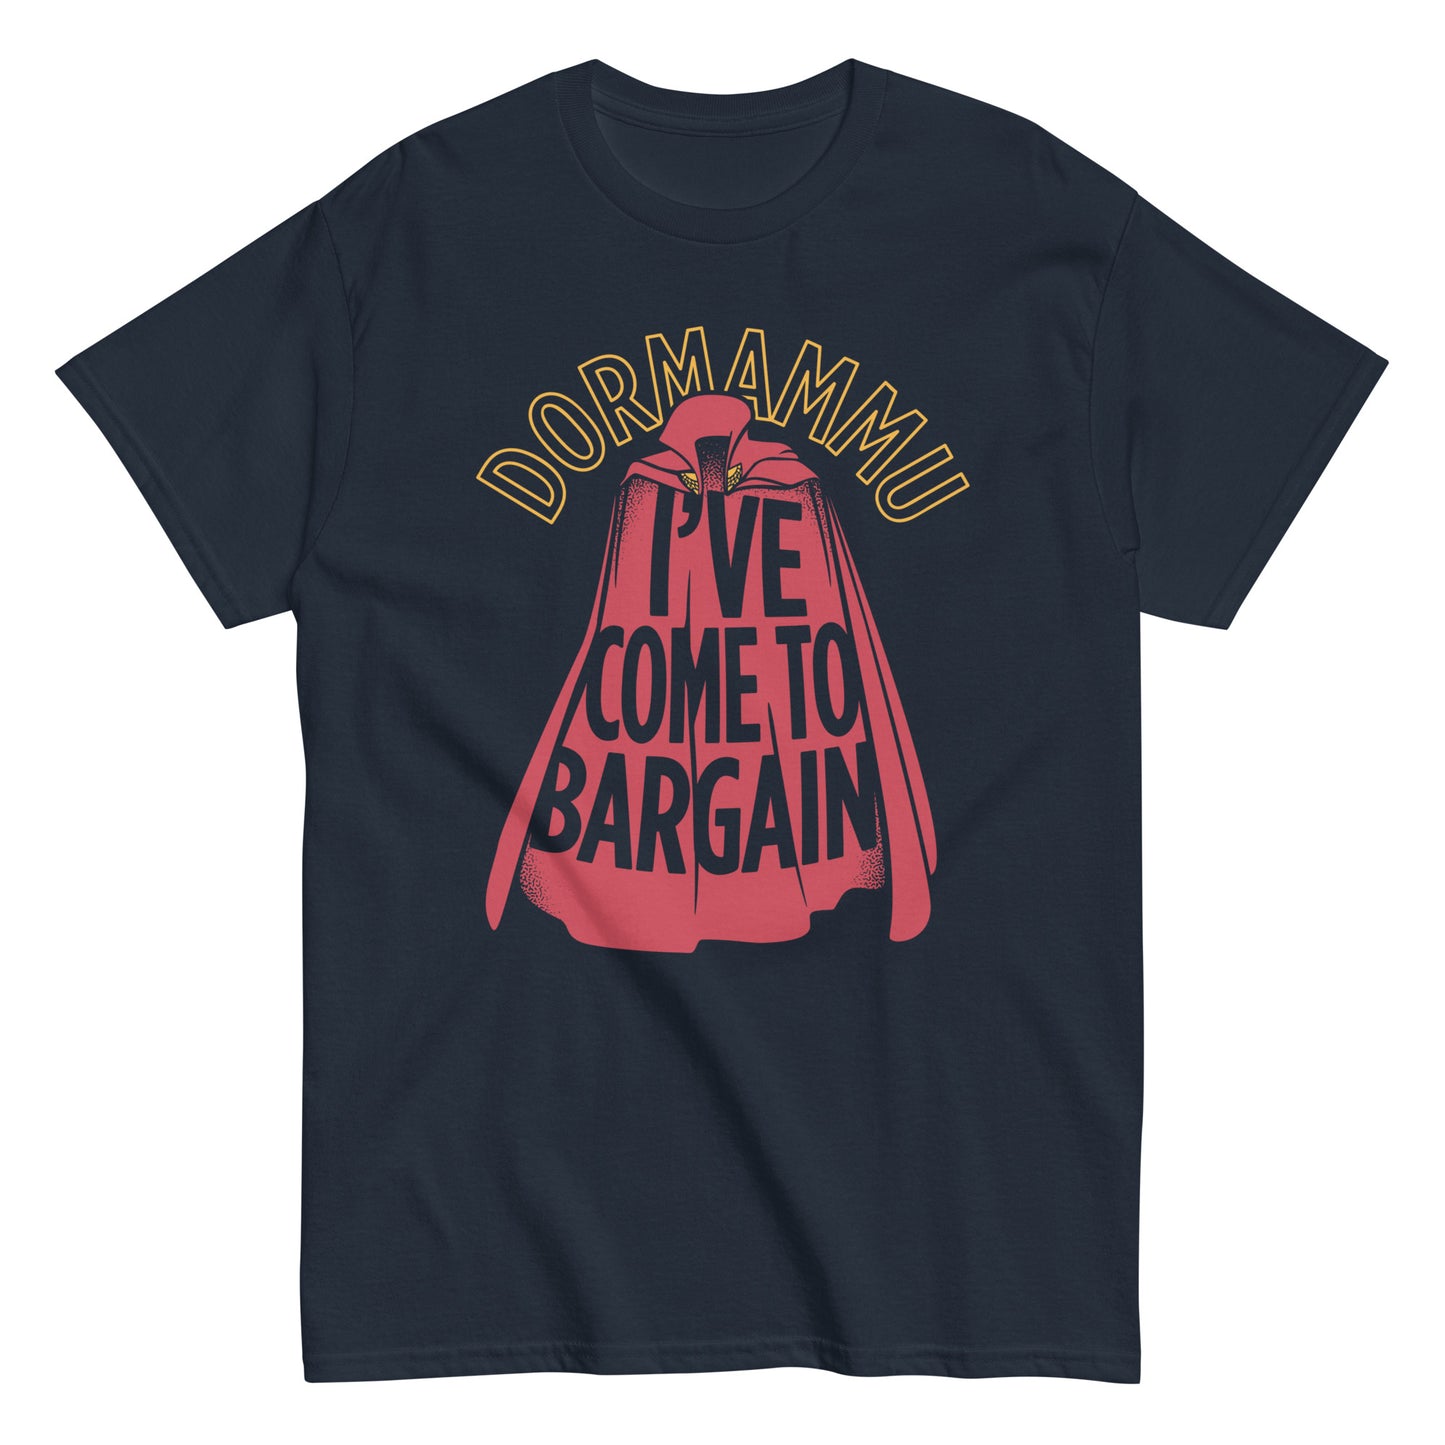 I've Come To Bargain Men's Classic Tee